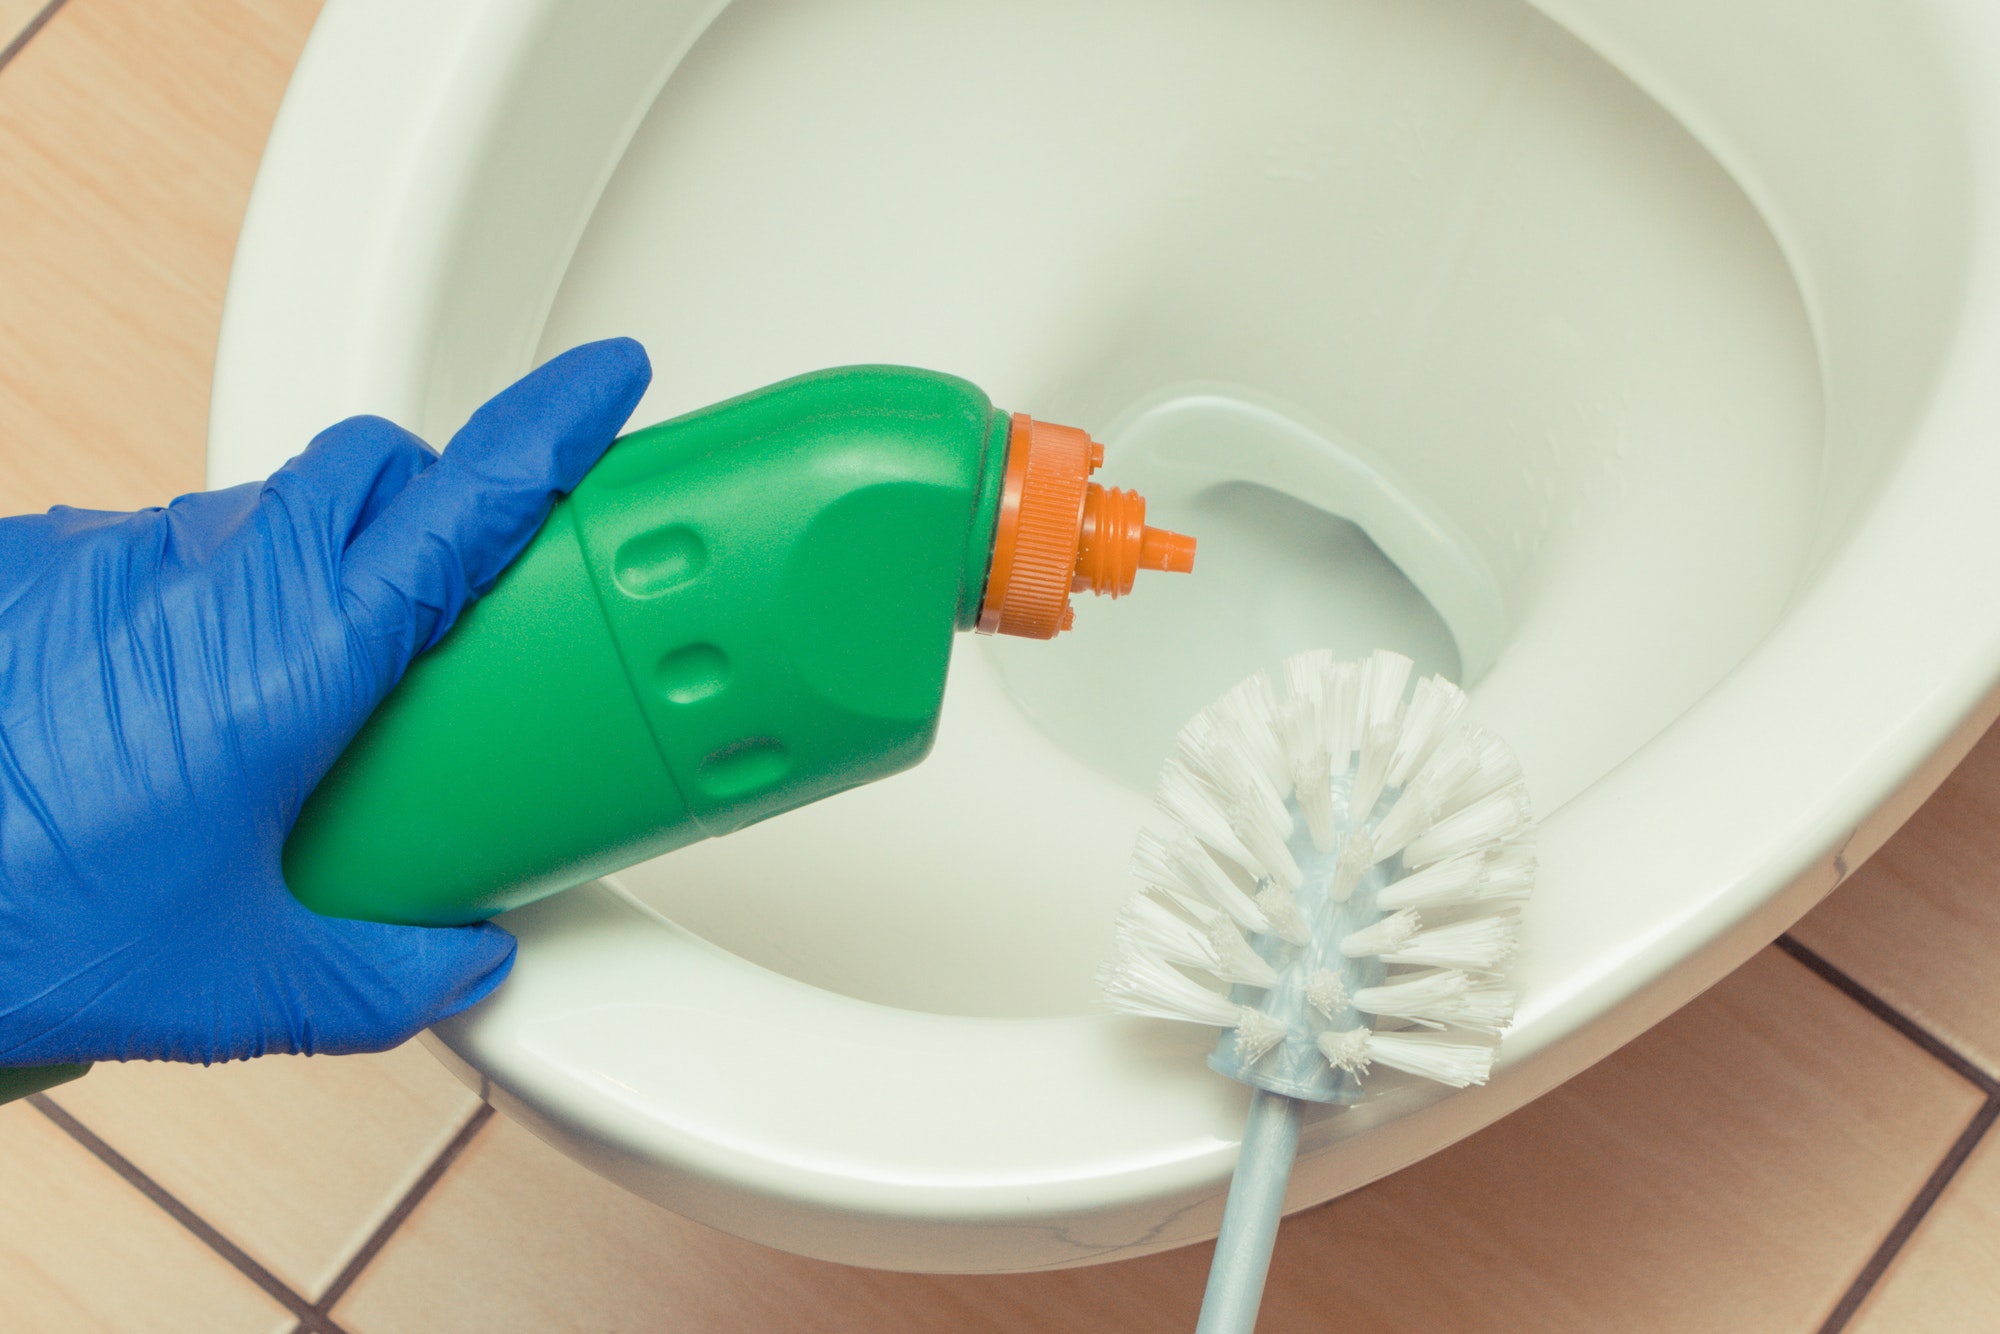 Hand of cleaner using domestic detergent and accessories for cleaning toilet. Household duties